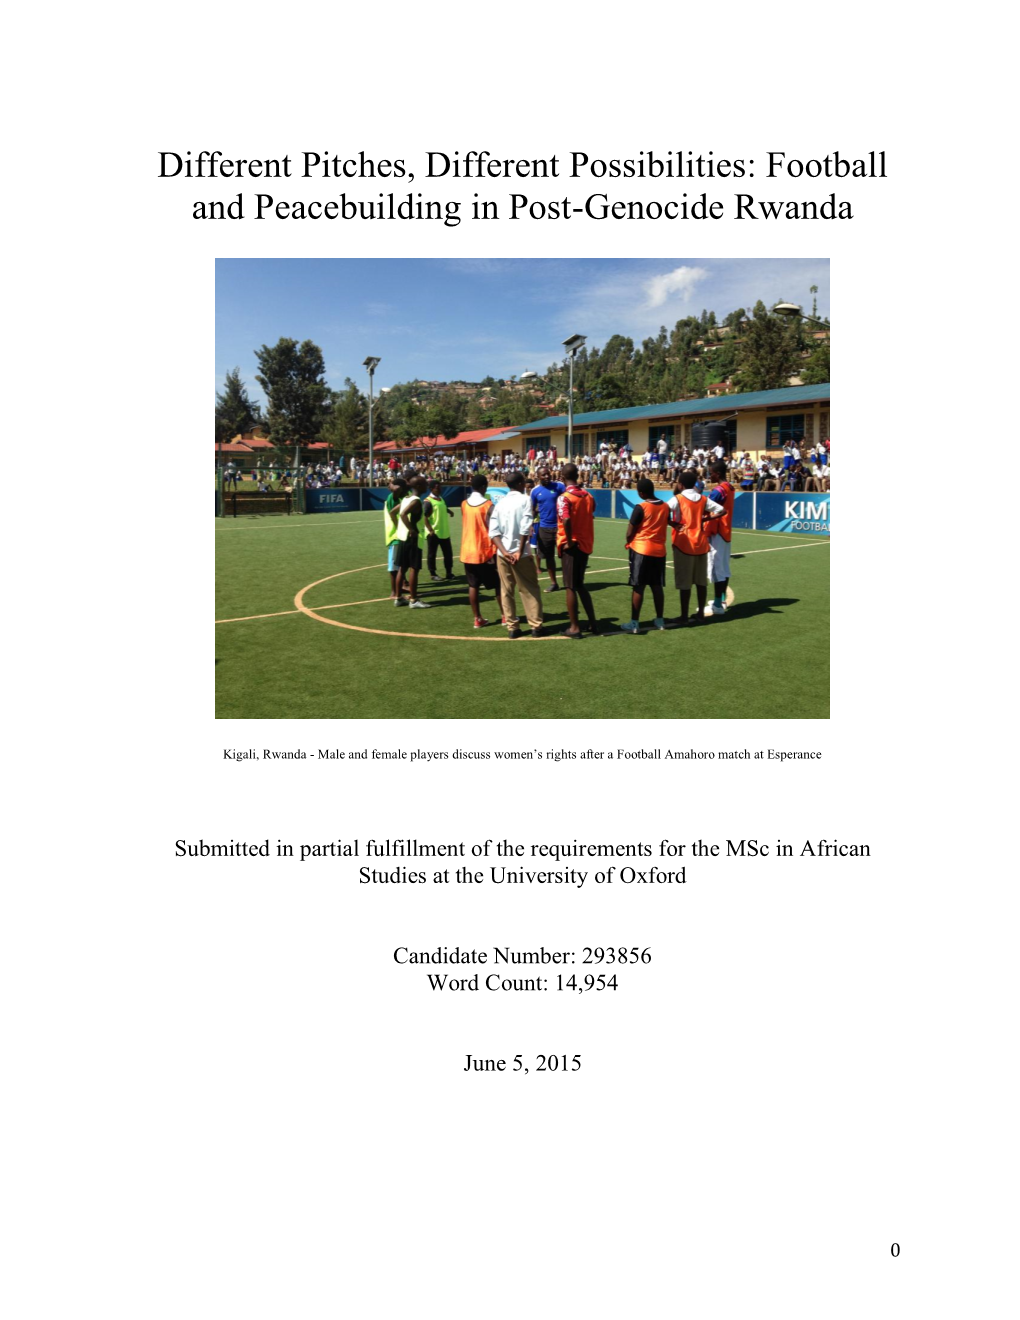 Different Pitches, Different Possibilities: Football and Peacebuilding in Post-Genocide Rwanda